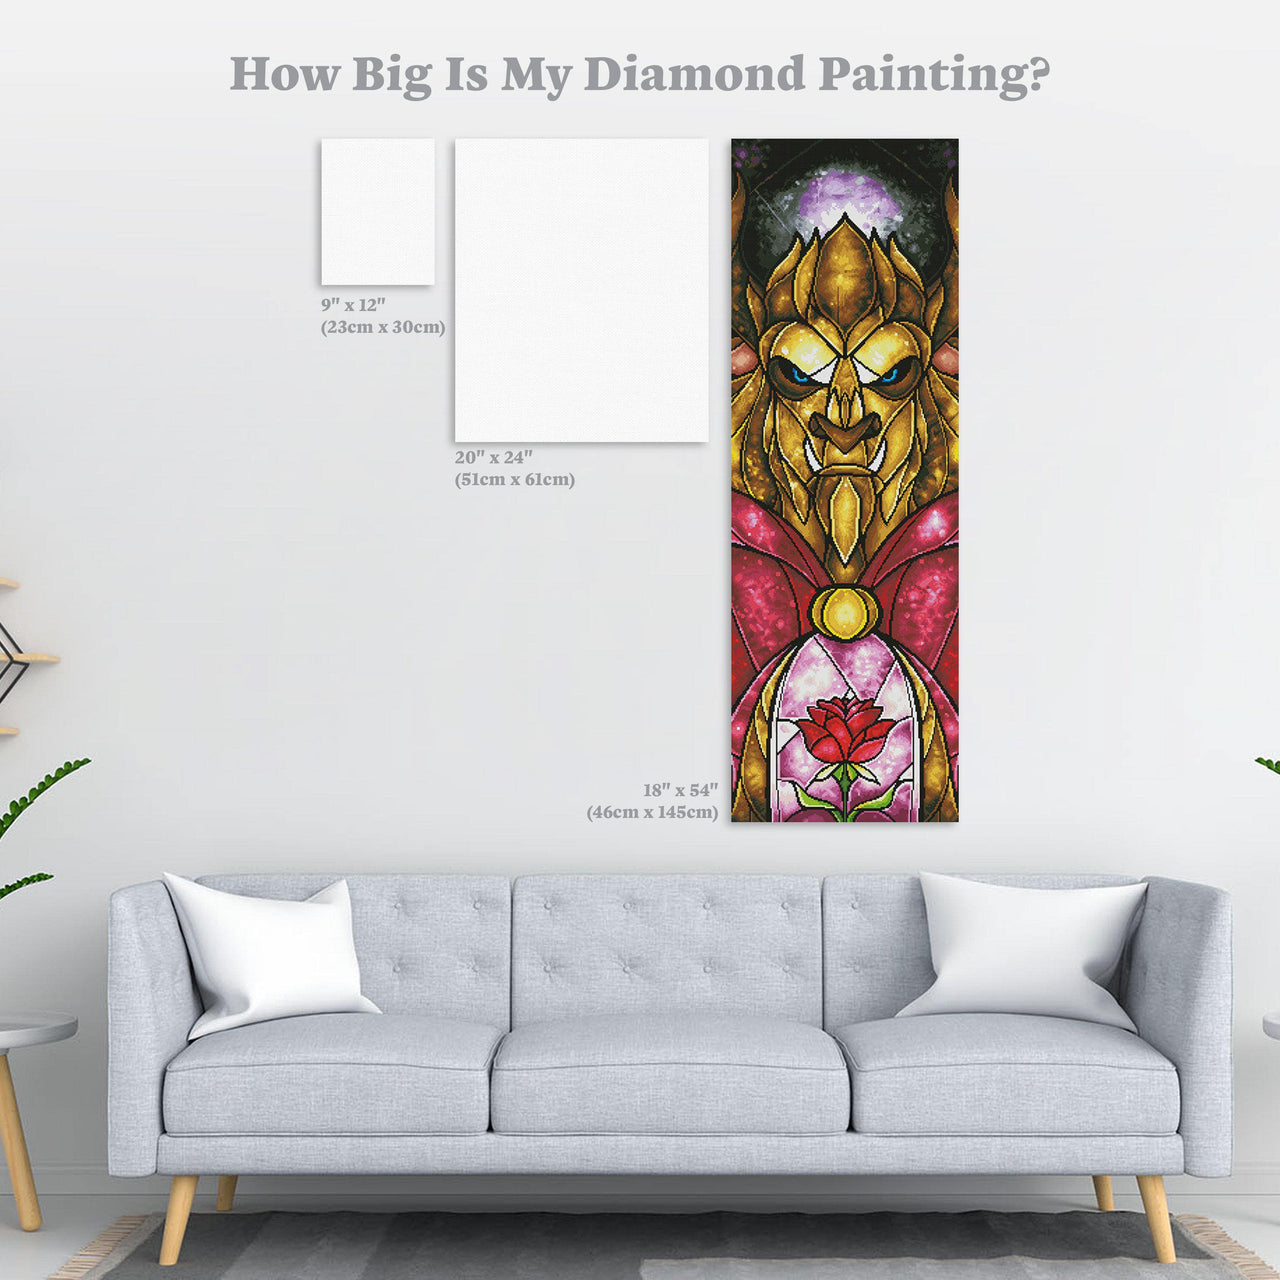 Diamond Painting The Beast 18" x 54″ (46cm x 145cm) / Round with 55 Colors including 3 ABs